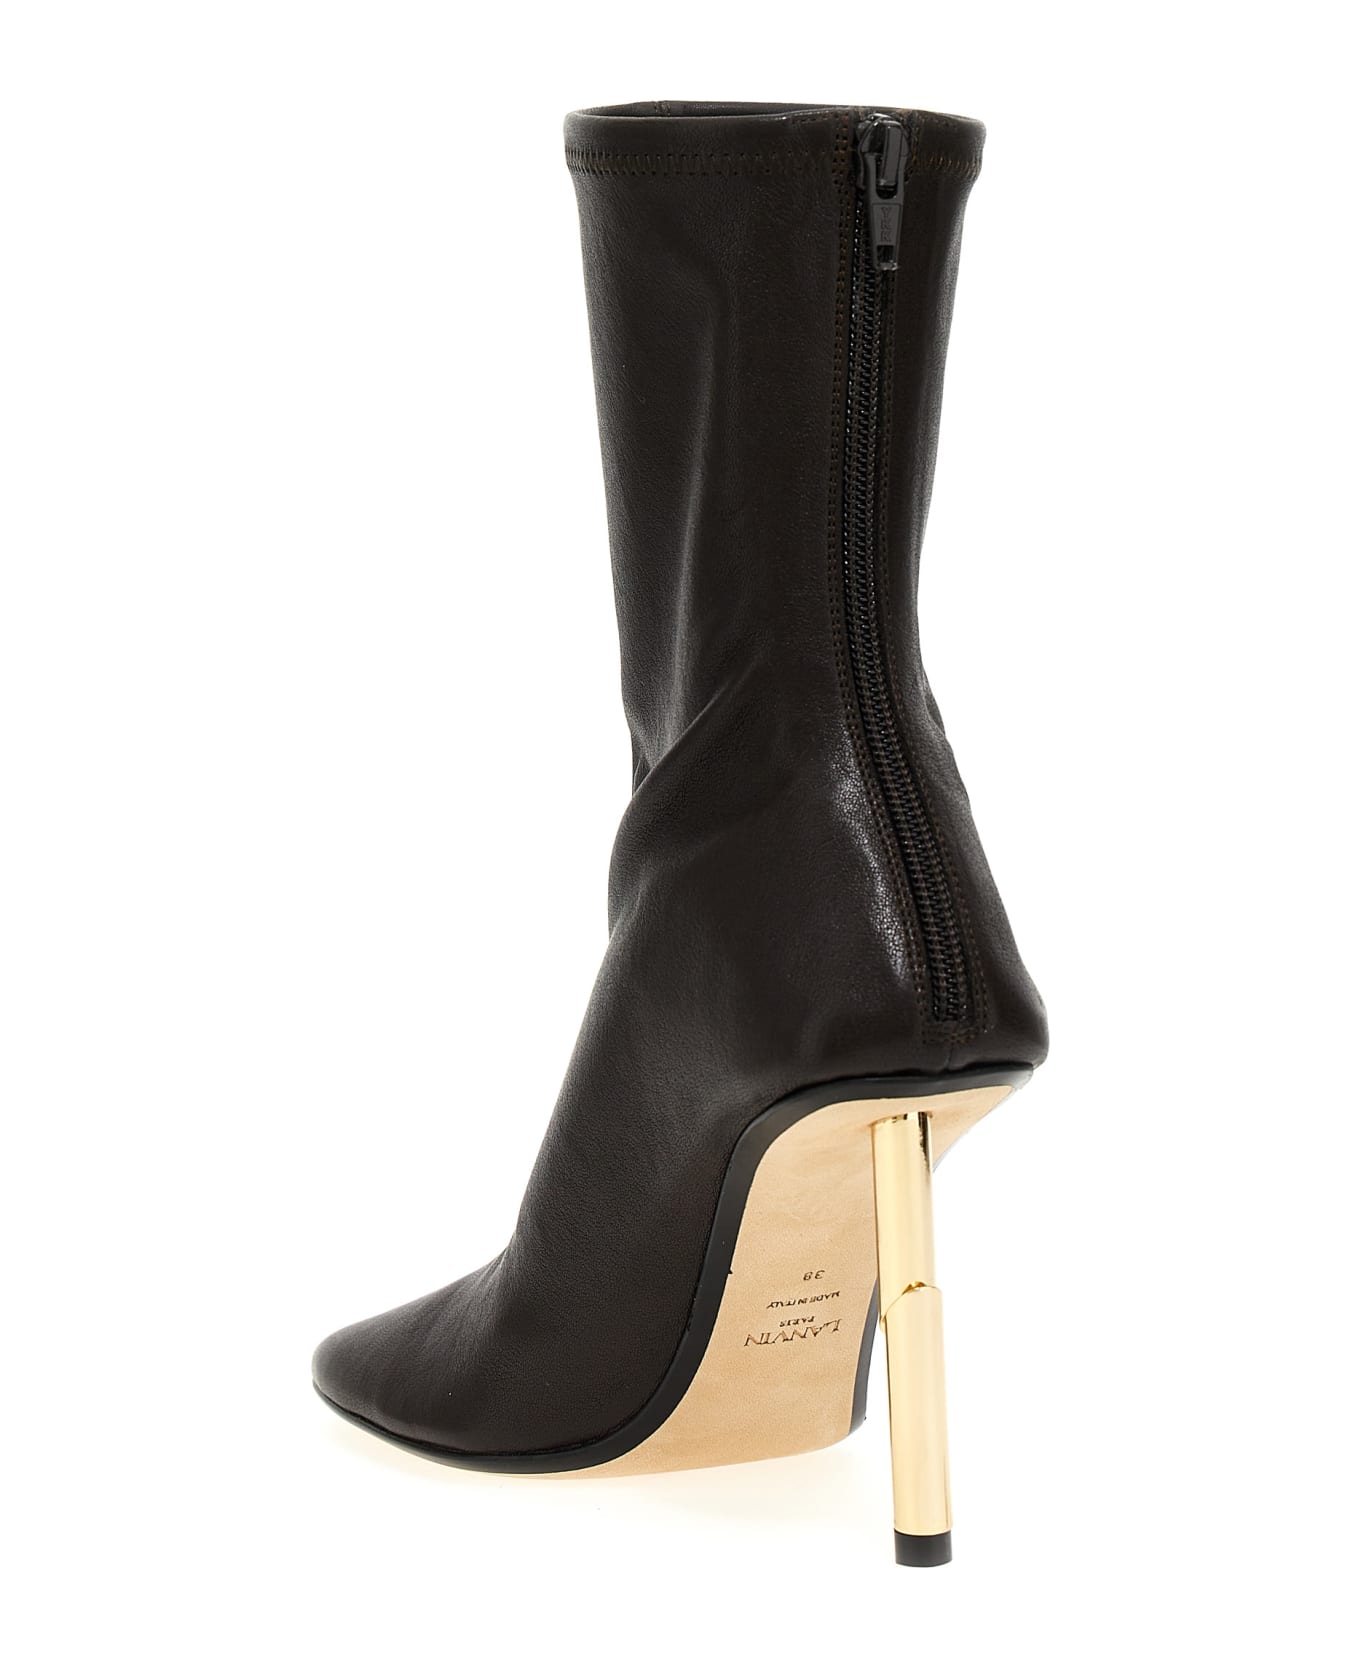 Lanvin 'sequence' Ankle Boots - Brown ブーツ